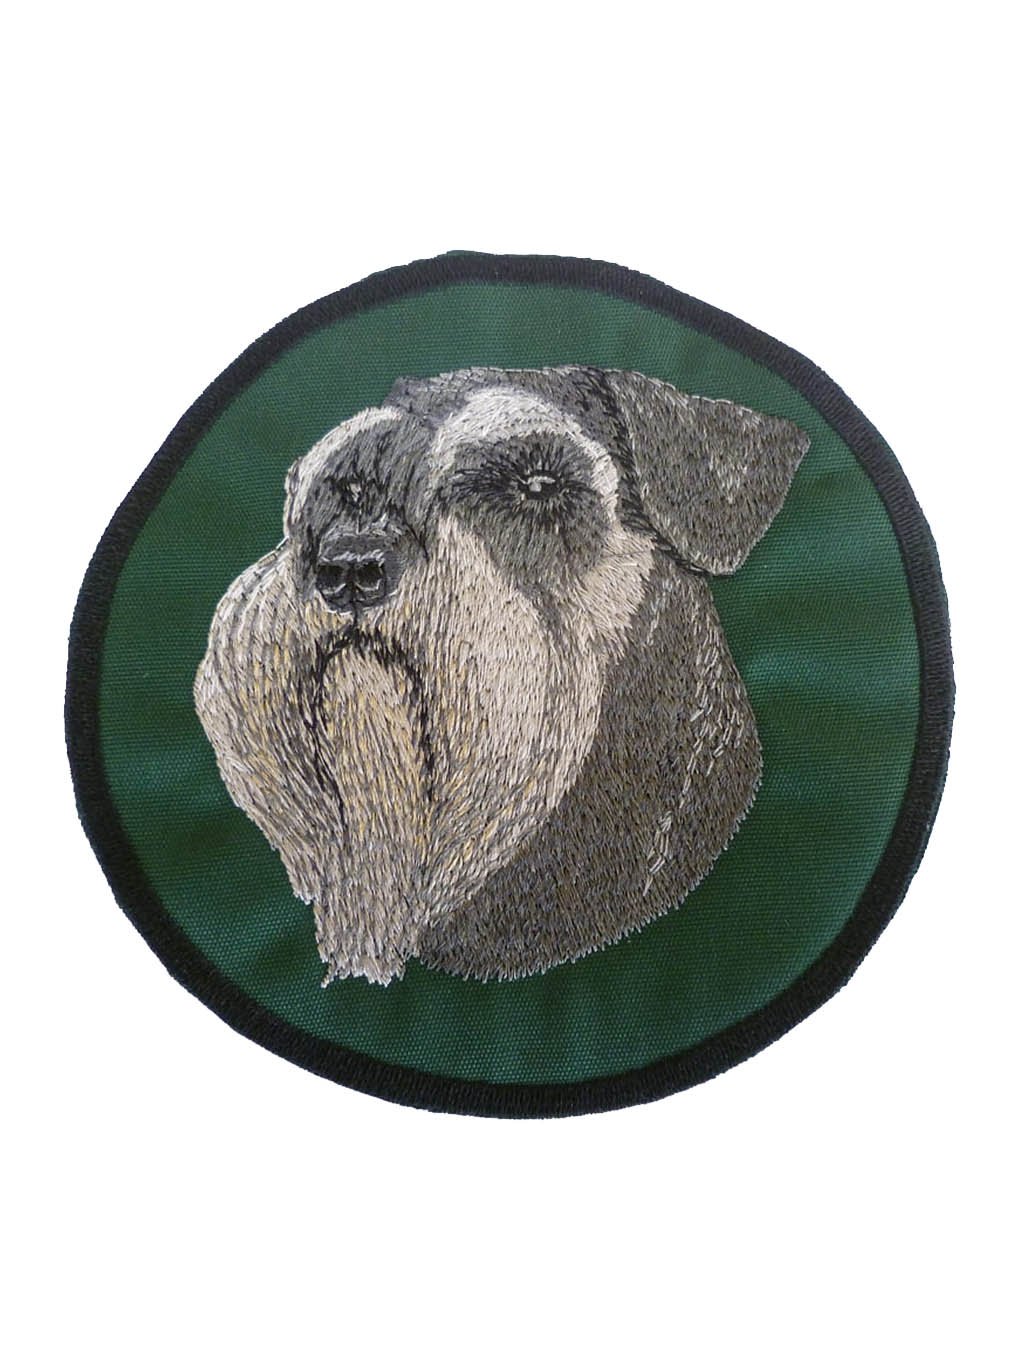 Dog patches